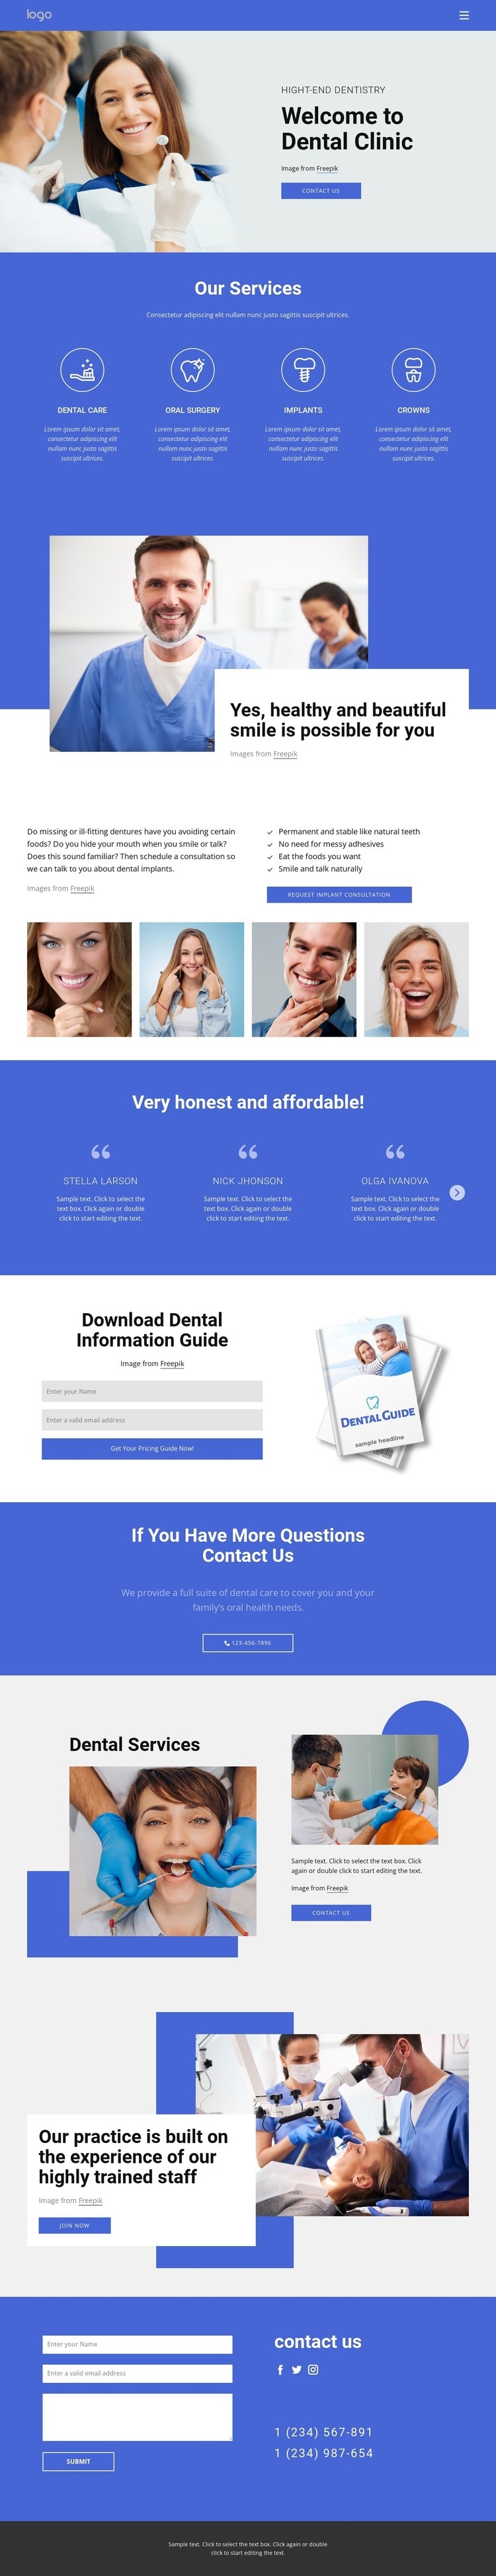 Welcome to dental clinic Homepage Design